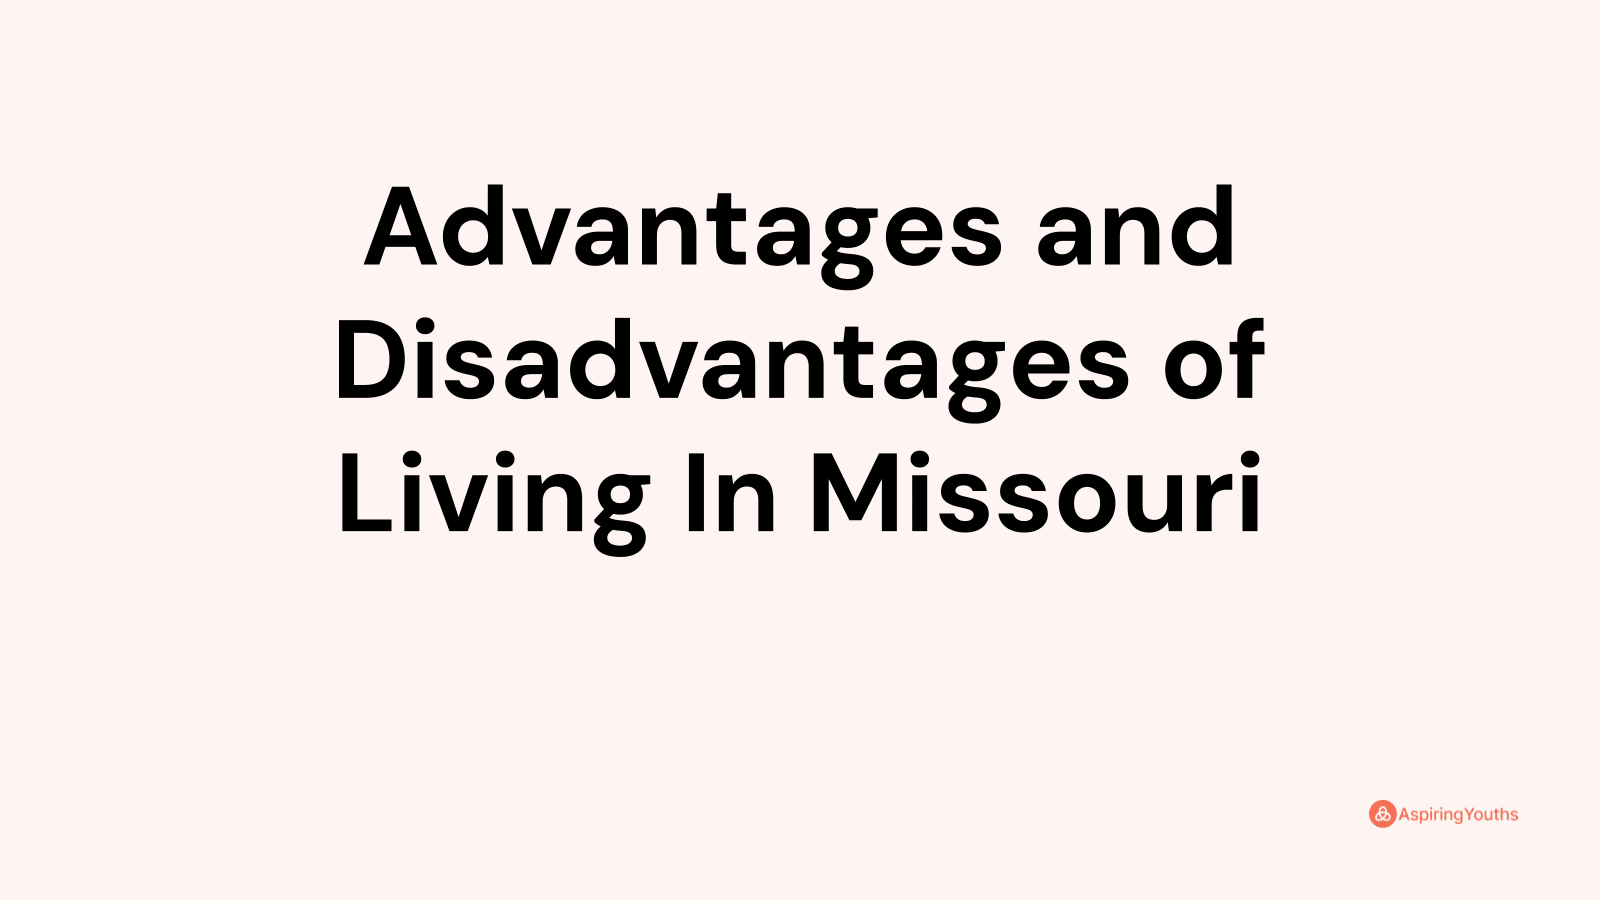 Advantages and disadvantages of Living In Missouri